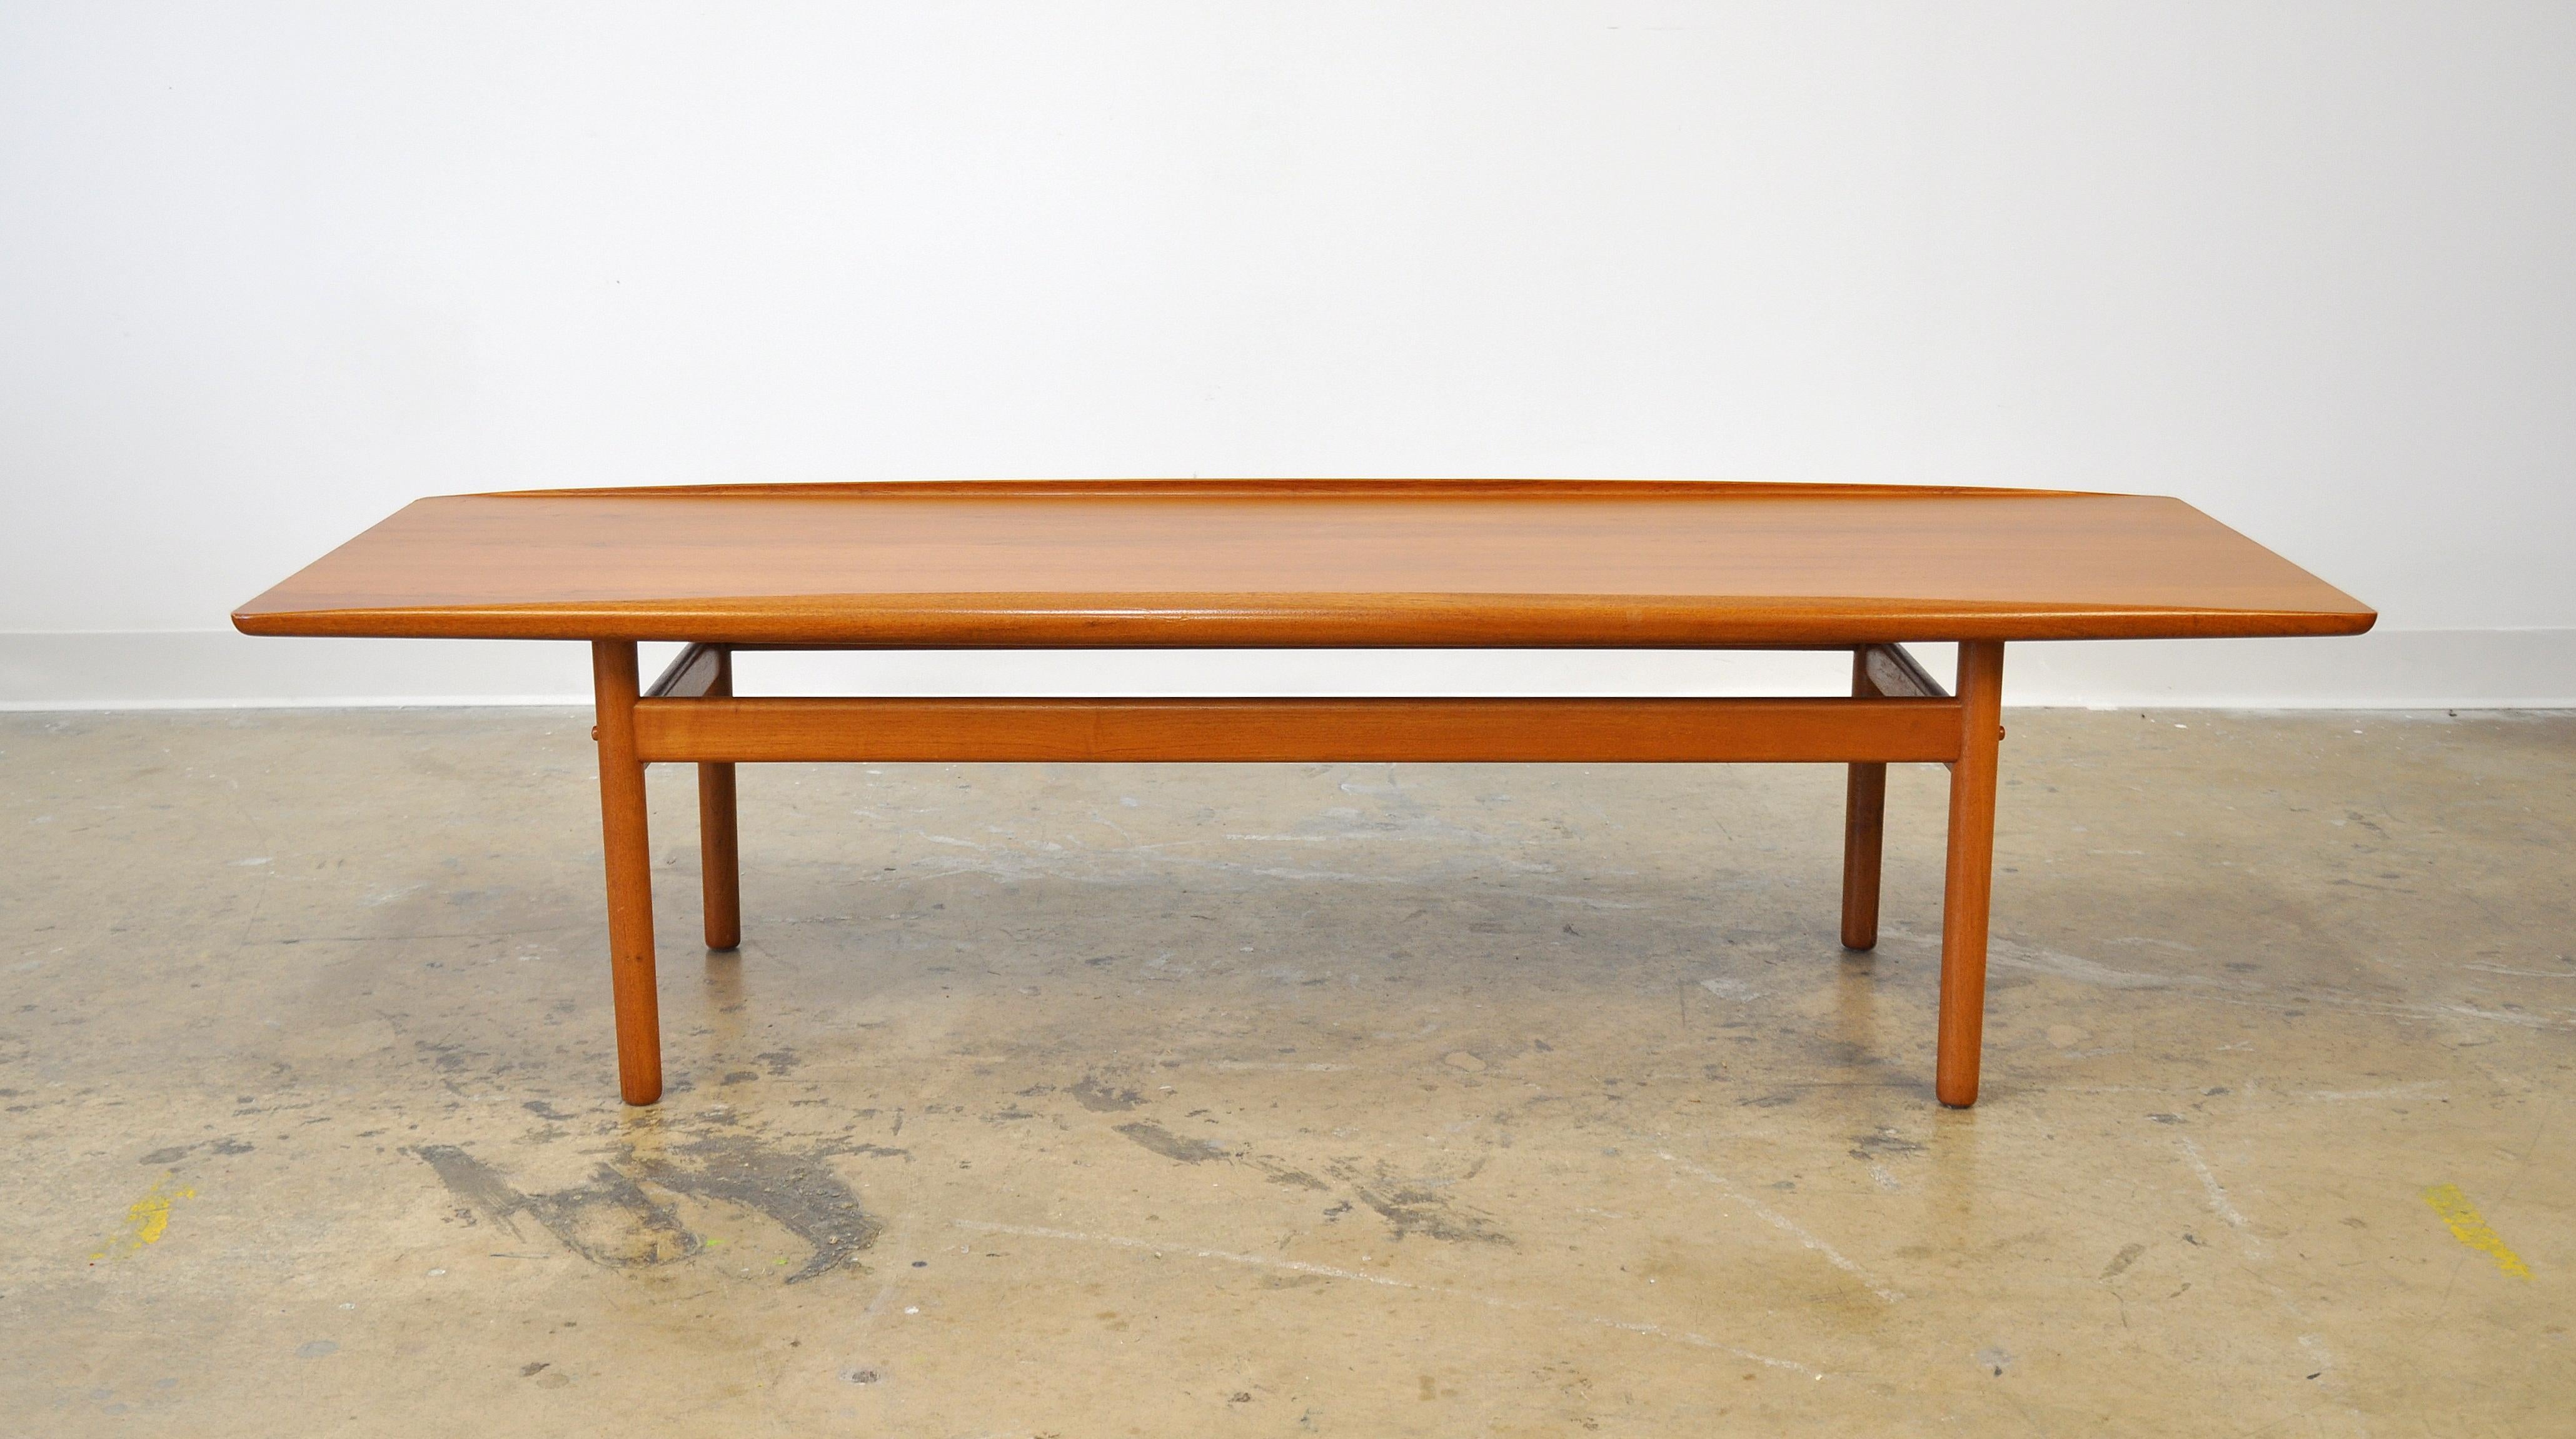 A midcentury Danish modern rectangular cocktail table designed by Grete Jalk, manufactured by Poul Jeppesen, dating from the early 1960s. The table features sculpted raised edges, a distinctive feature of Jalk's designs. A timeless and Classic